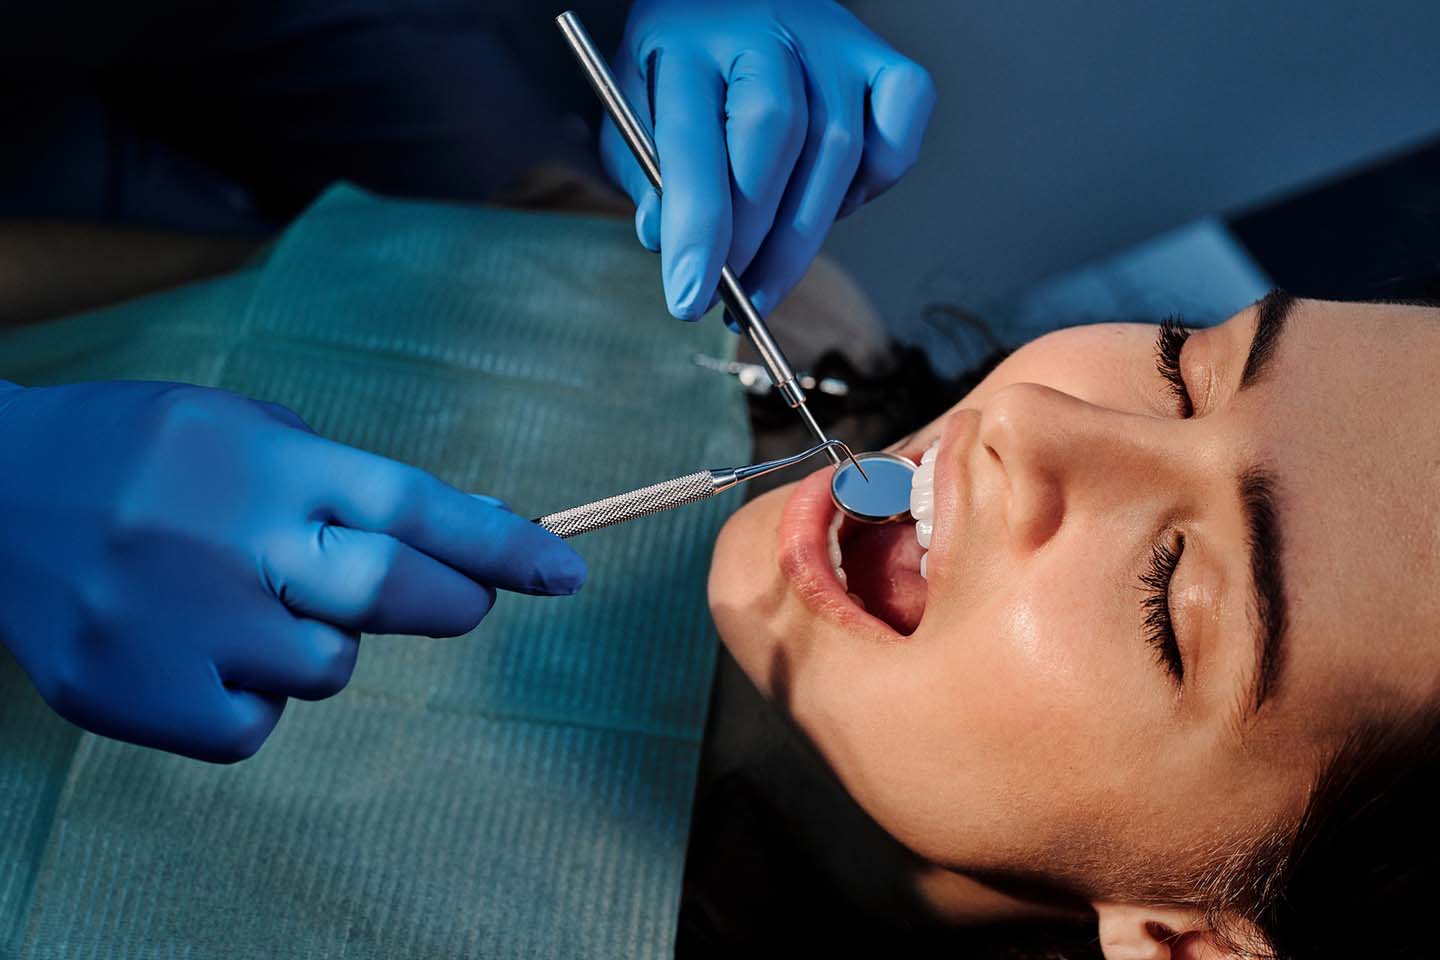 Dentist in blue gloves working in patient's mouth